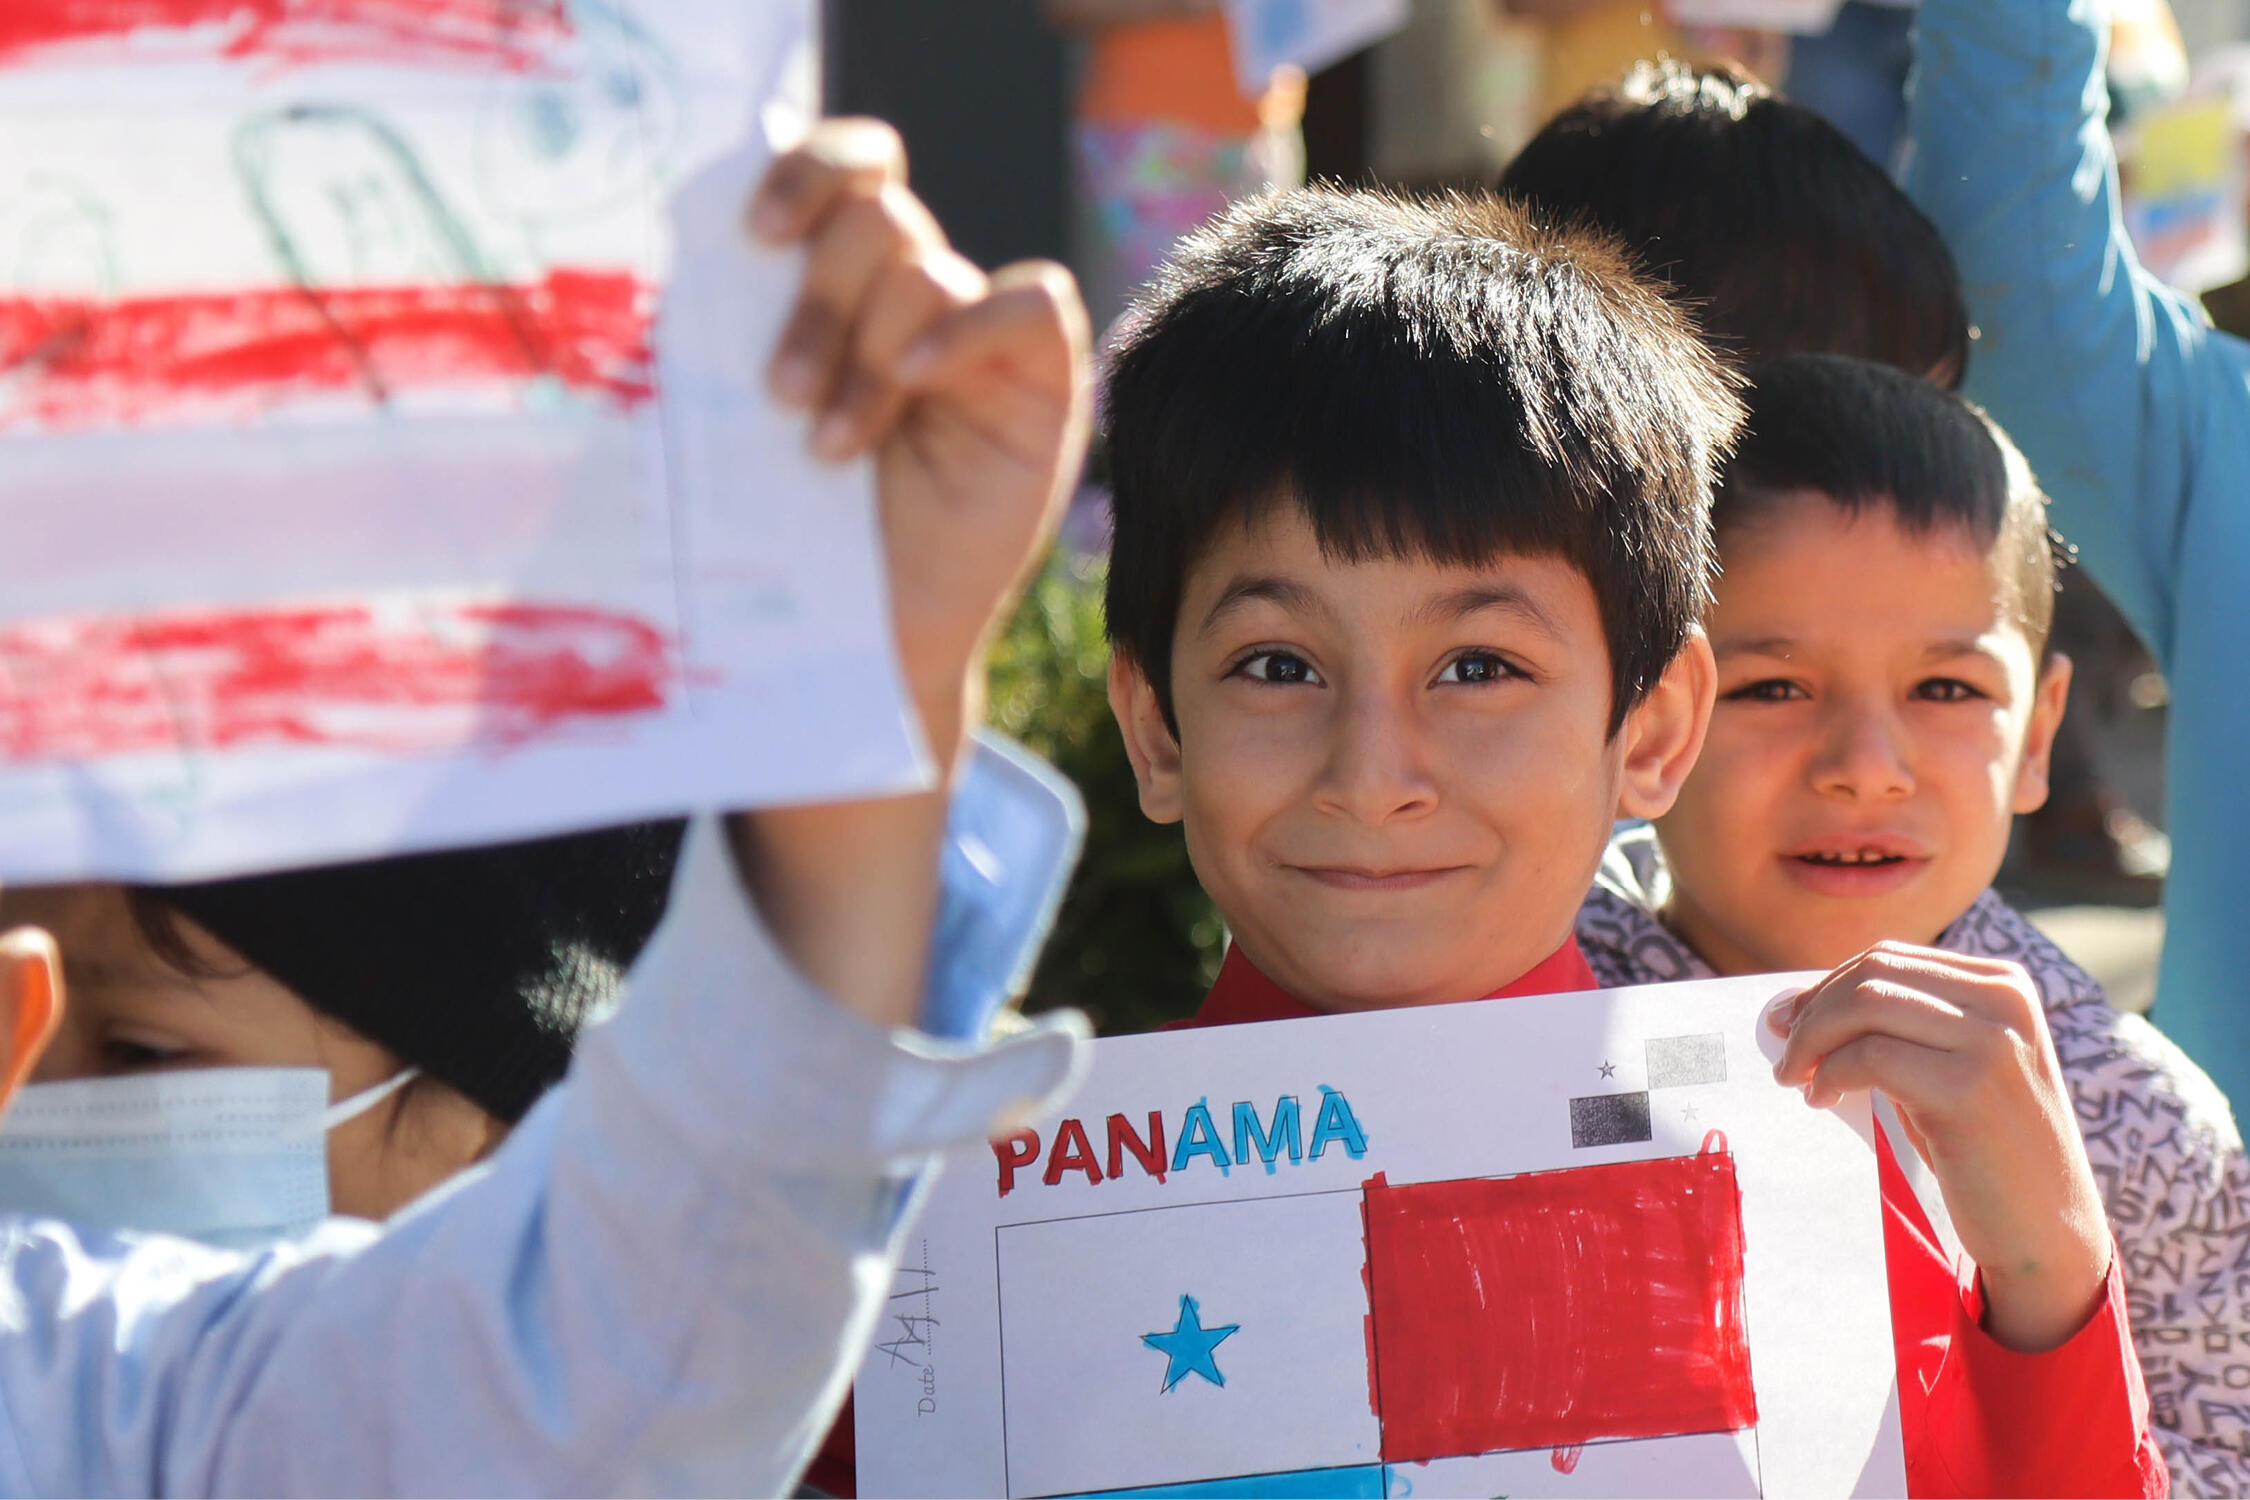 Student smiling and holding up a drawing of the Panamanian flag